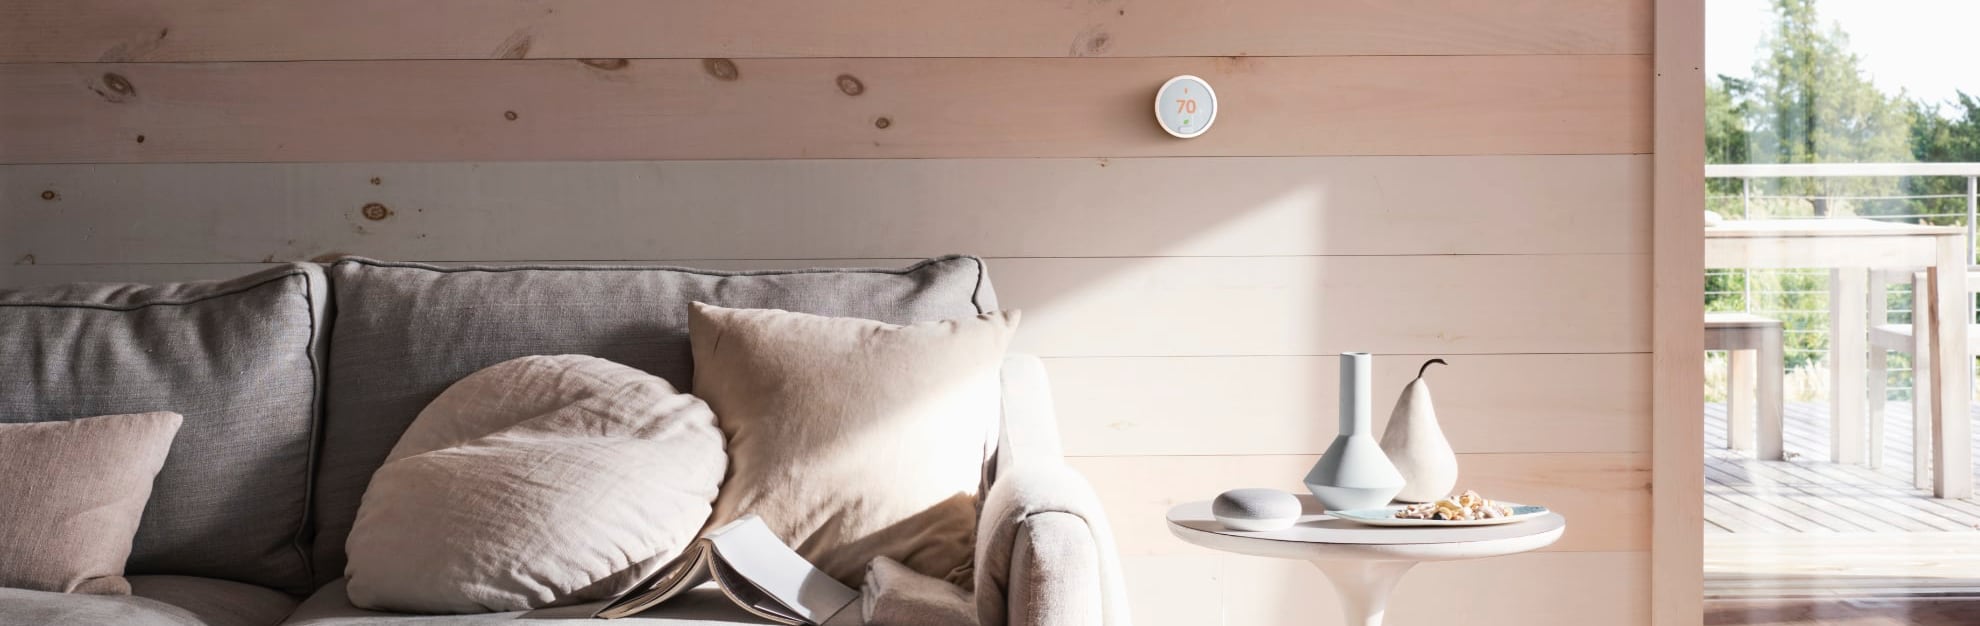 Vivint Home Automation in Chico